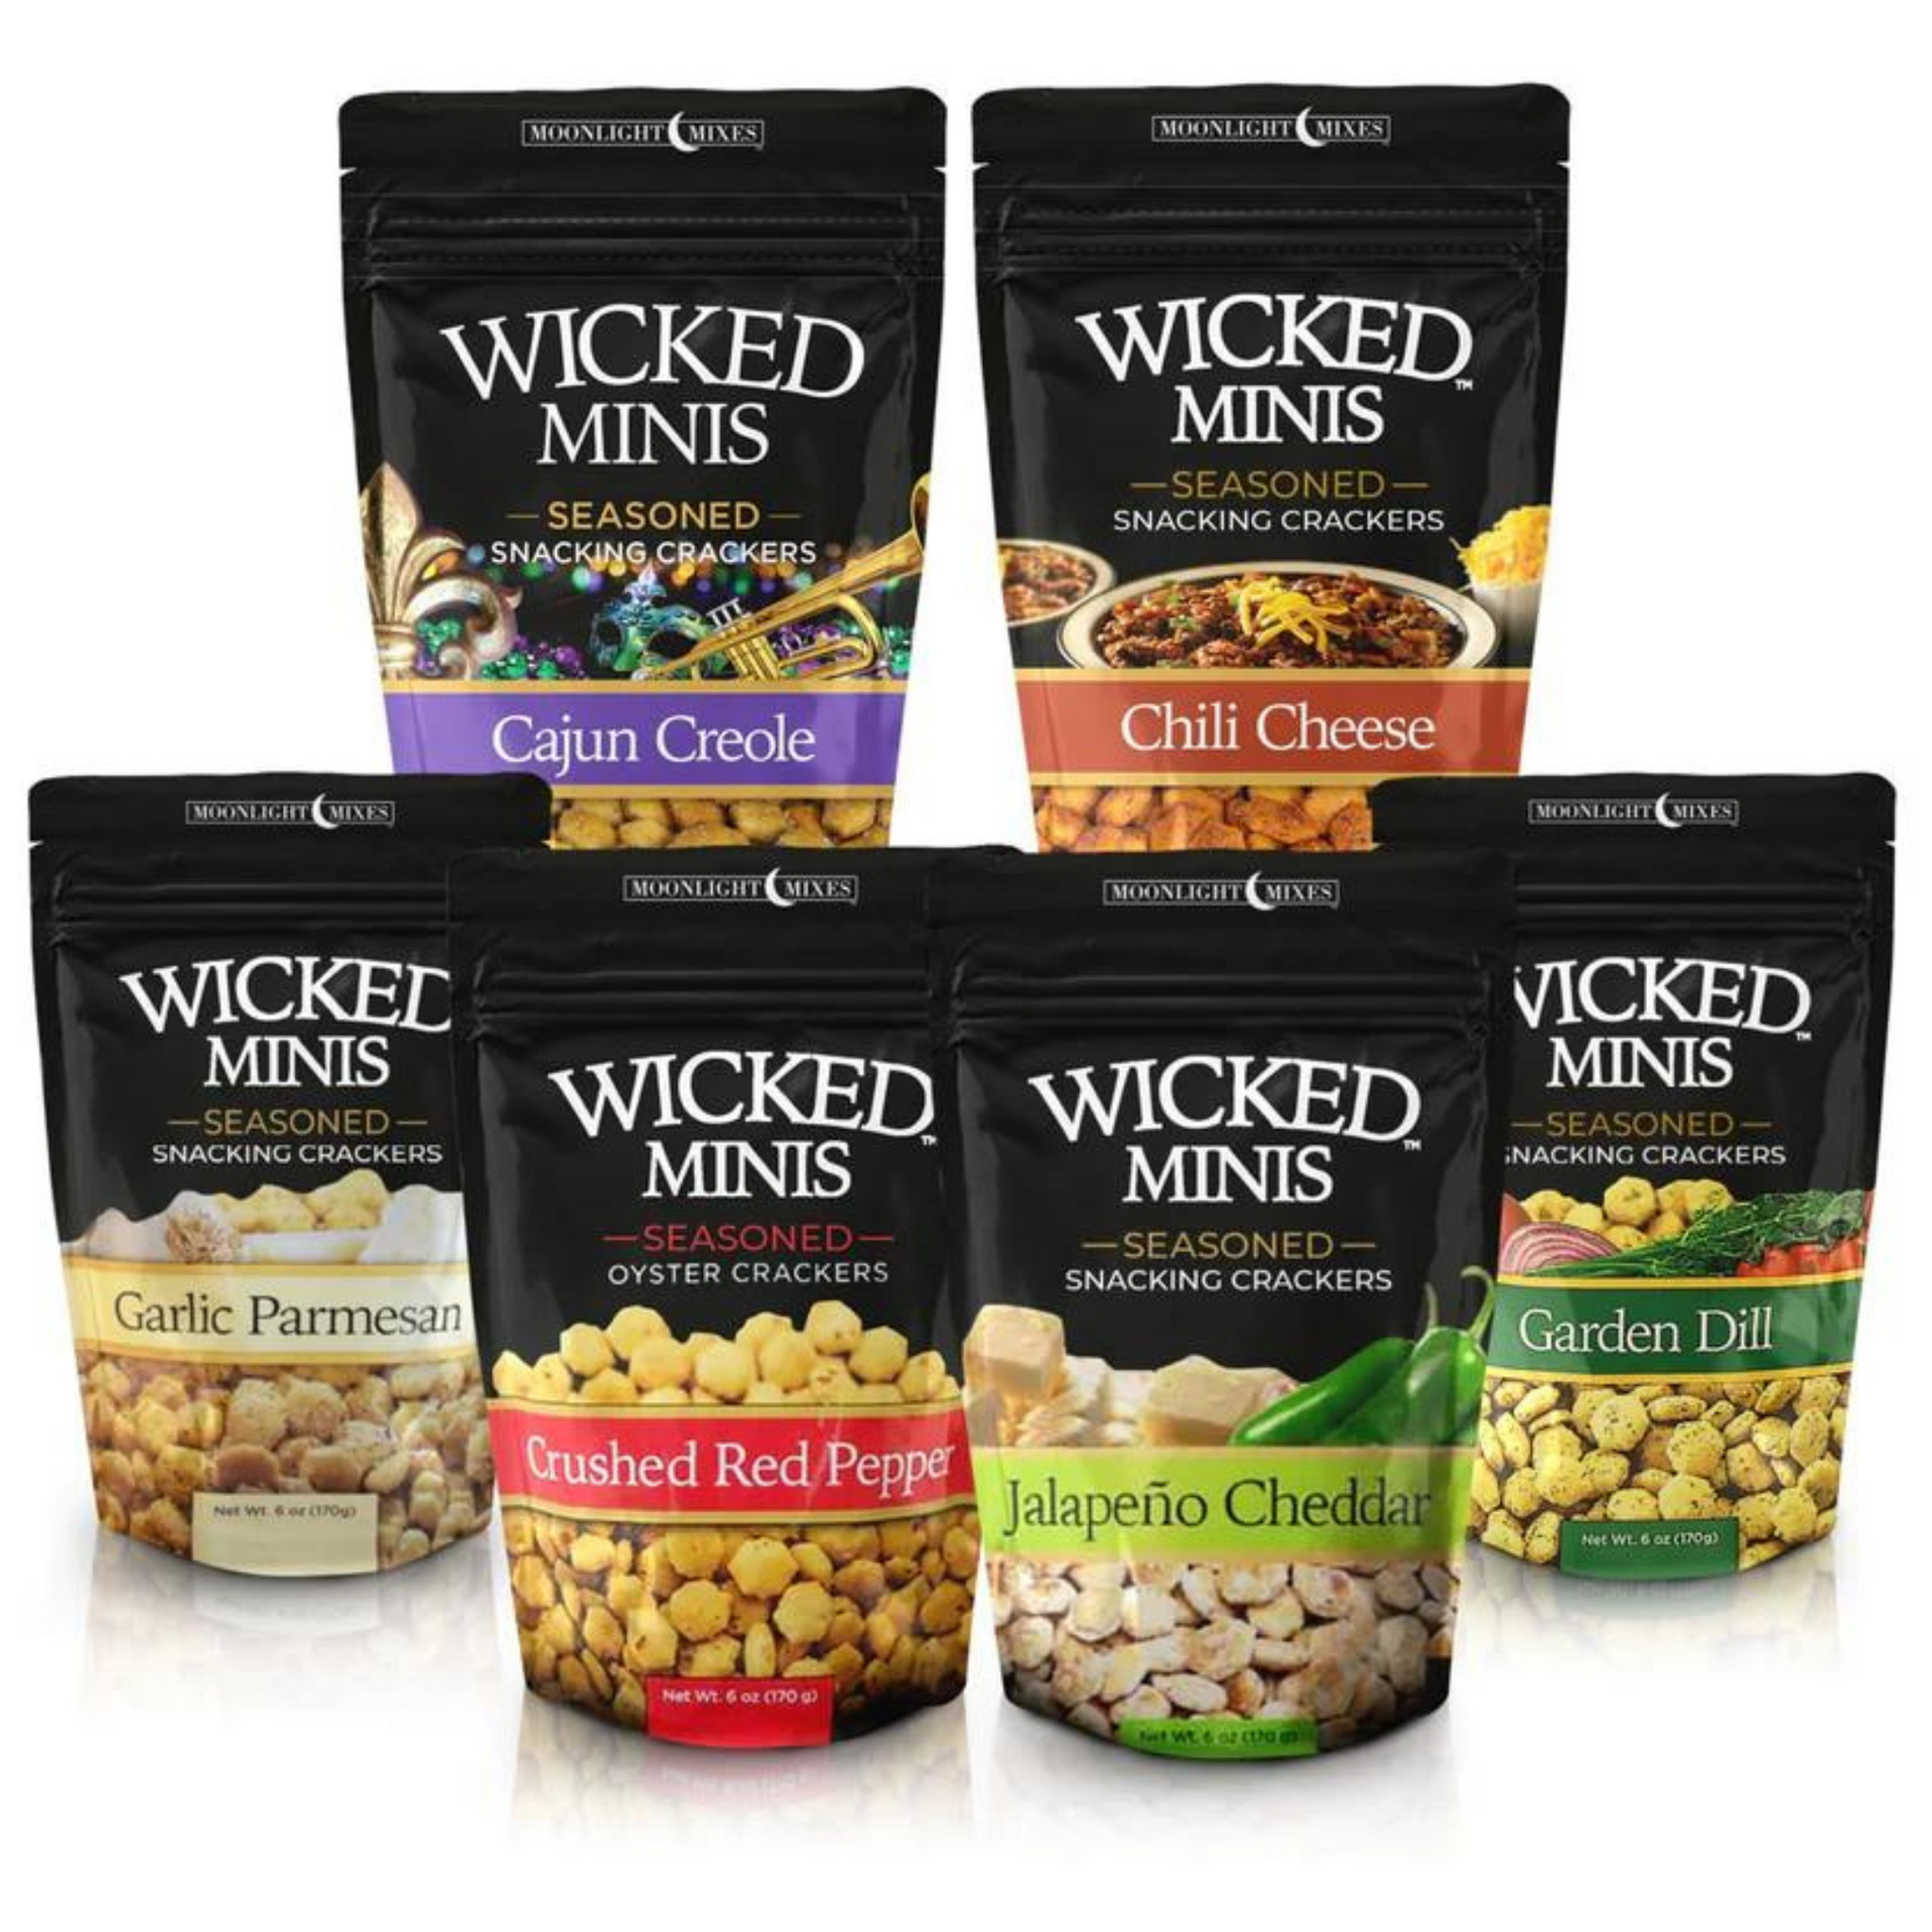 Wicked Minis are the perfect snack! These bite-sized pretzel morsels come in six bold flavors ready to tantalize your taste buds. Enjoy Garden Dill, Garlic Parmesan, Crushed Red Pepper, Jalepeno Cheddar, Chili Cheese, and Cajun Creole - each bursting with unique flavor. Treat yourself to a snack that packs a punch!